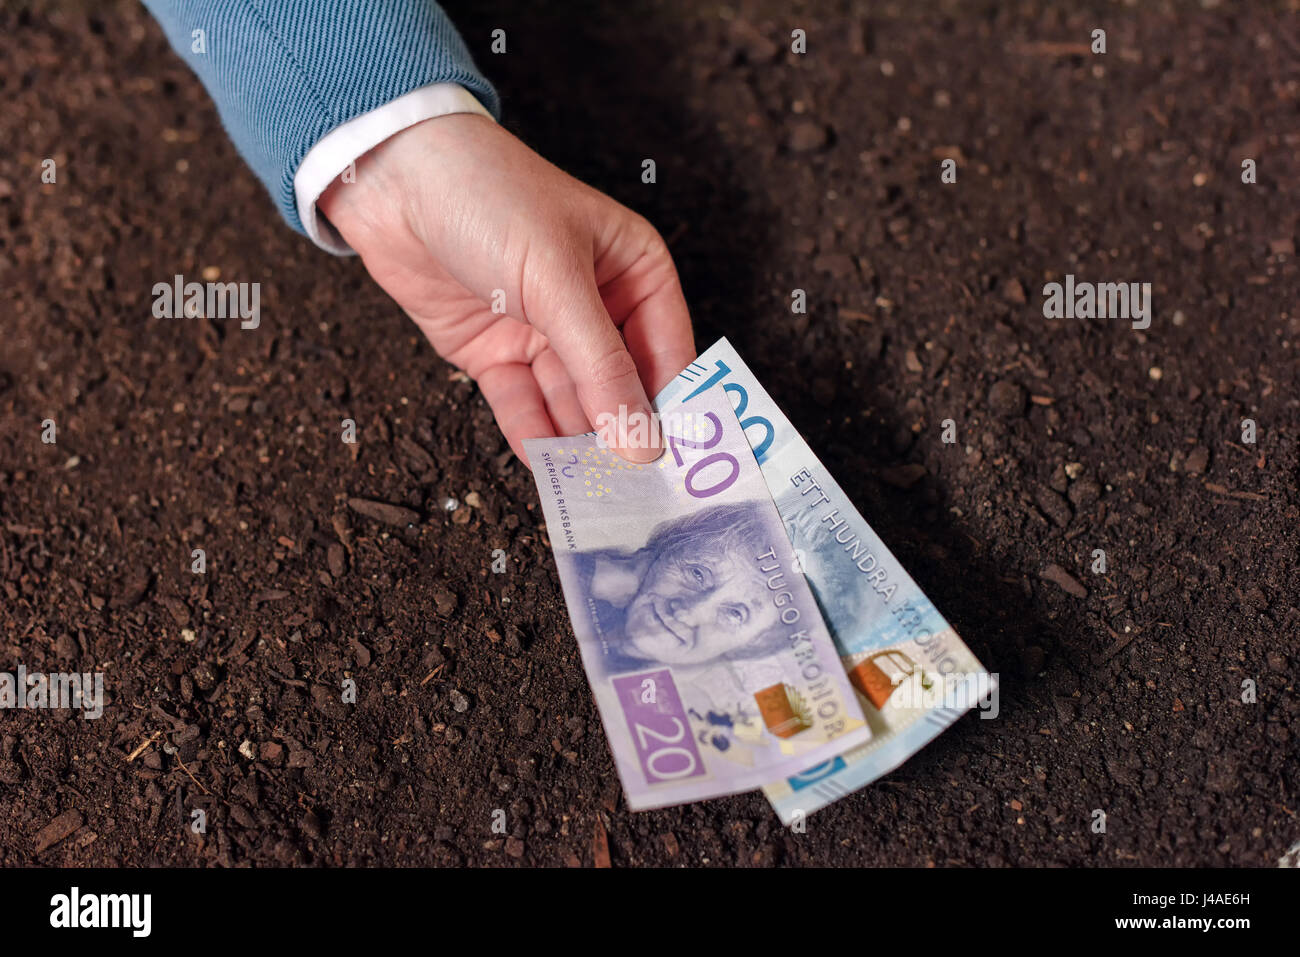 NOVI SAD, SERBIA - MAY 05, 2017: Bank loan in Swedish currency SEK for agribusiness startup, hand offering cash money banknotes as credit and allowanc Stock Photo